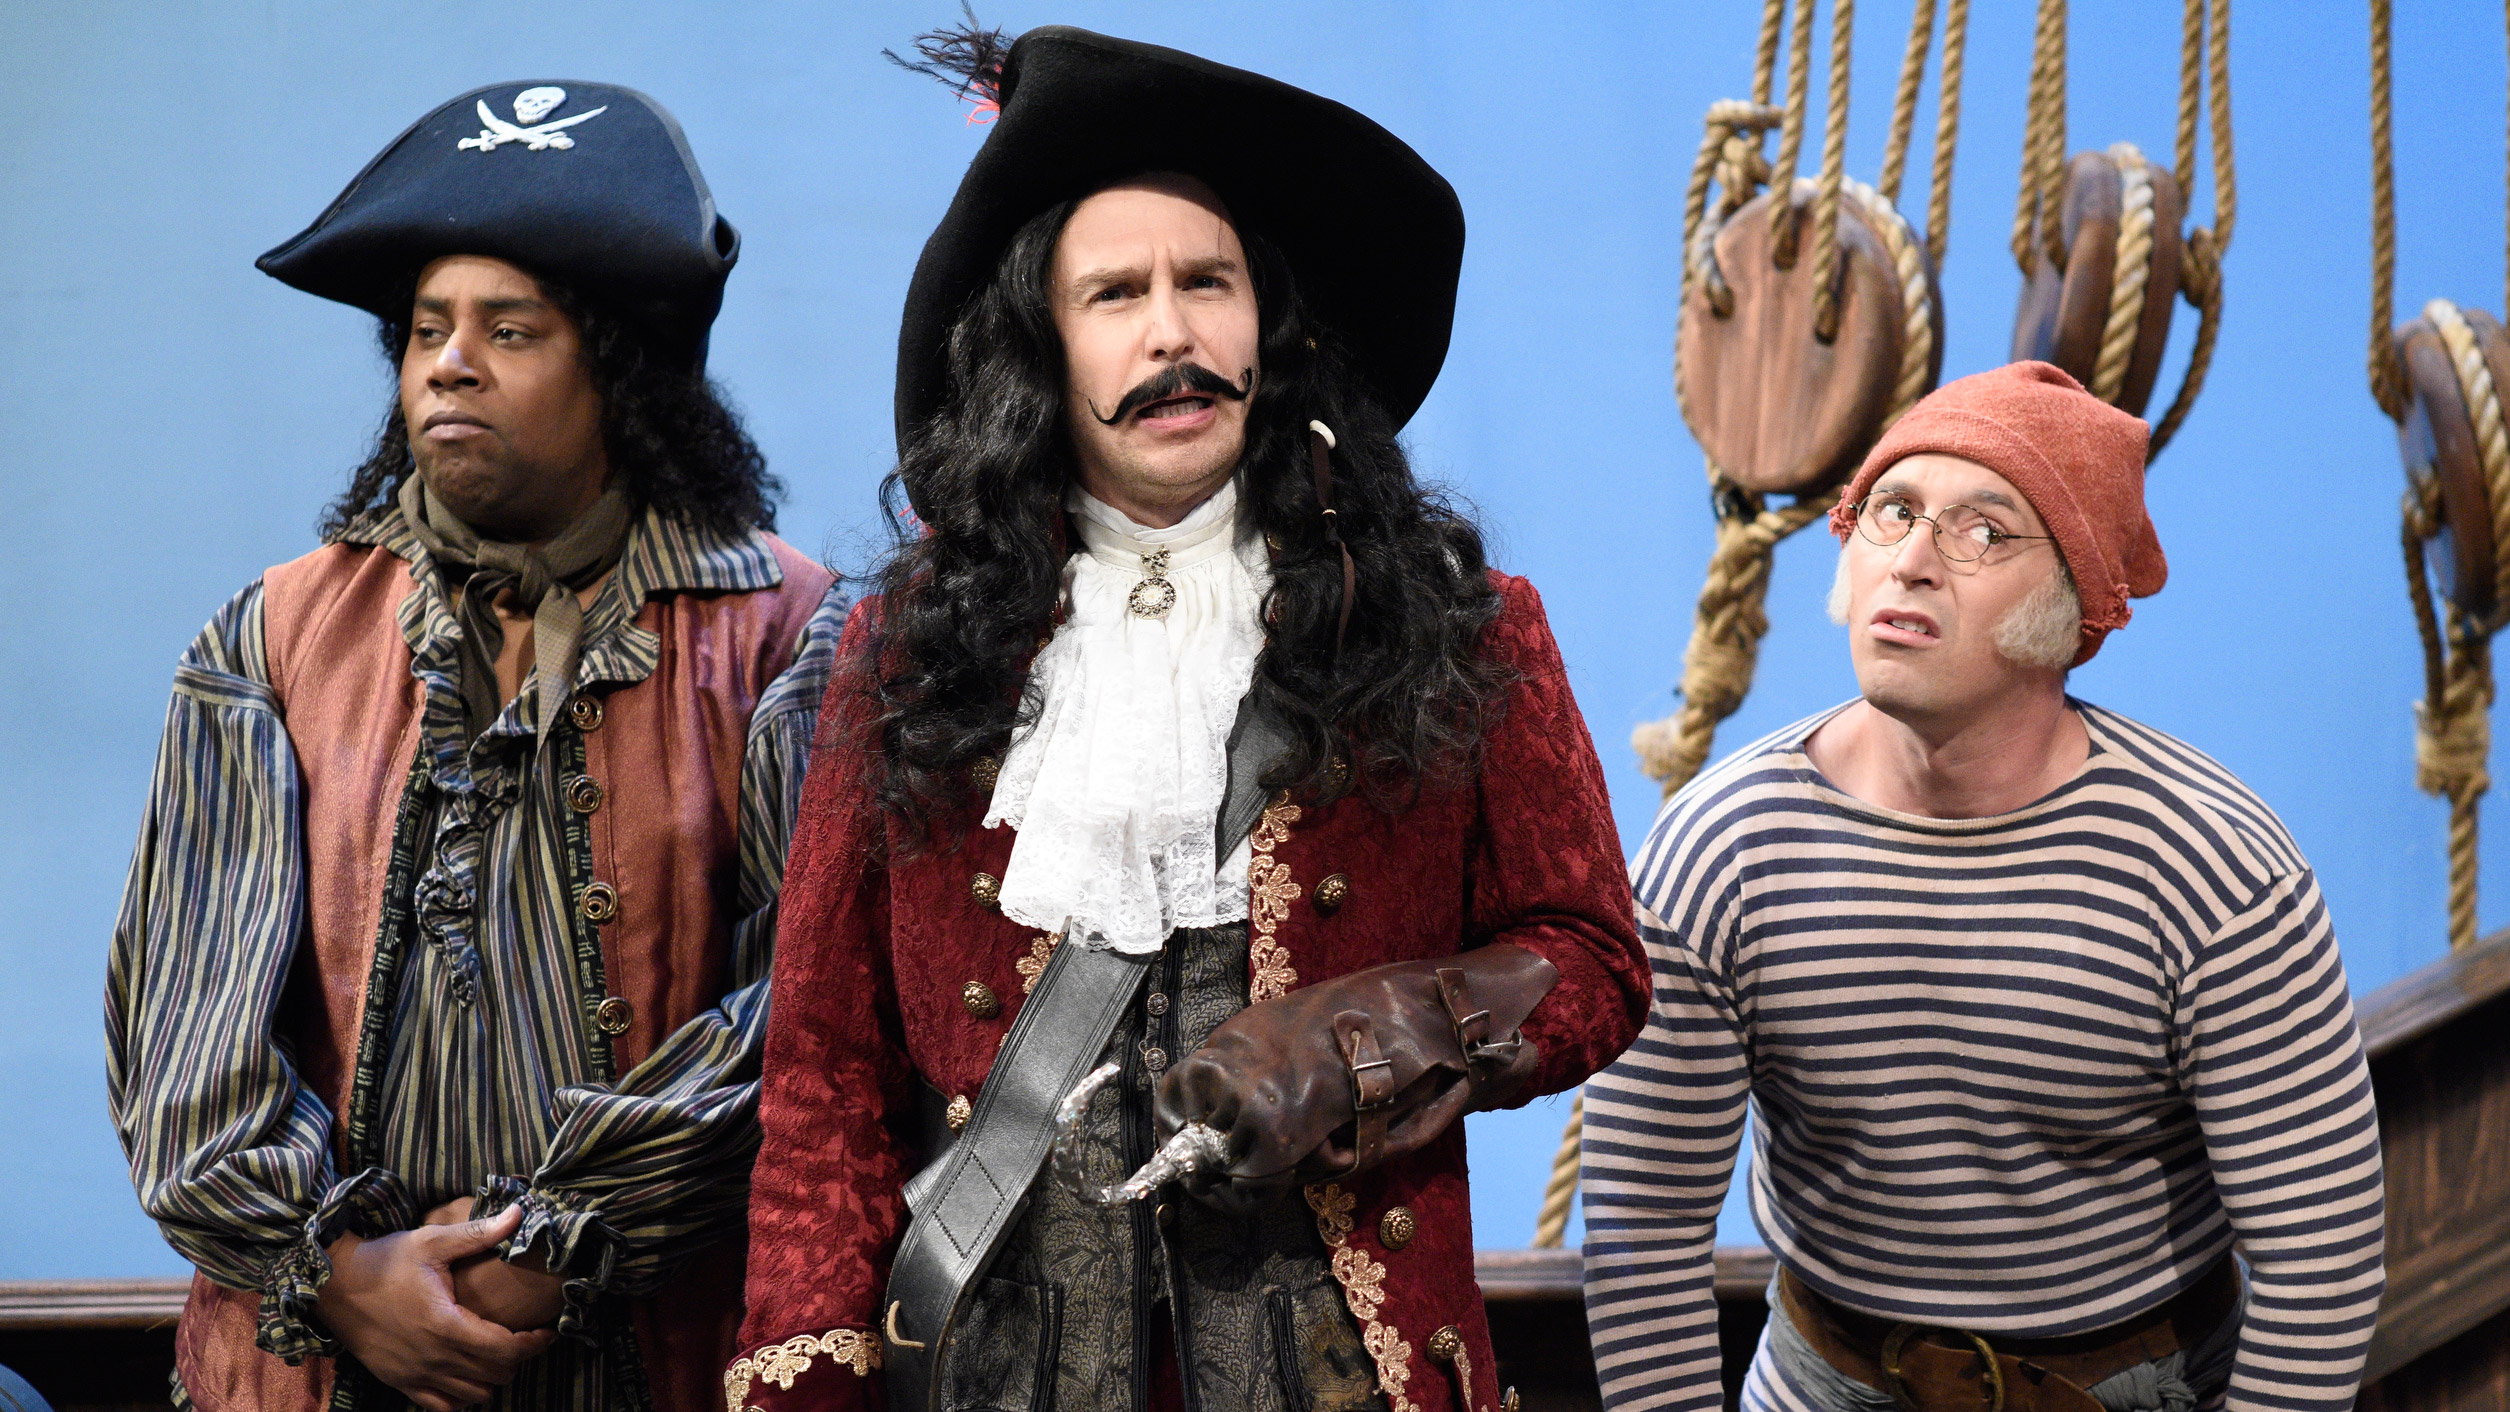 Watch Captain Hook From Saturday Night Live - NBC.com